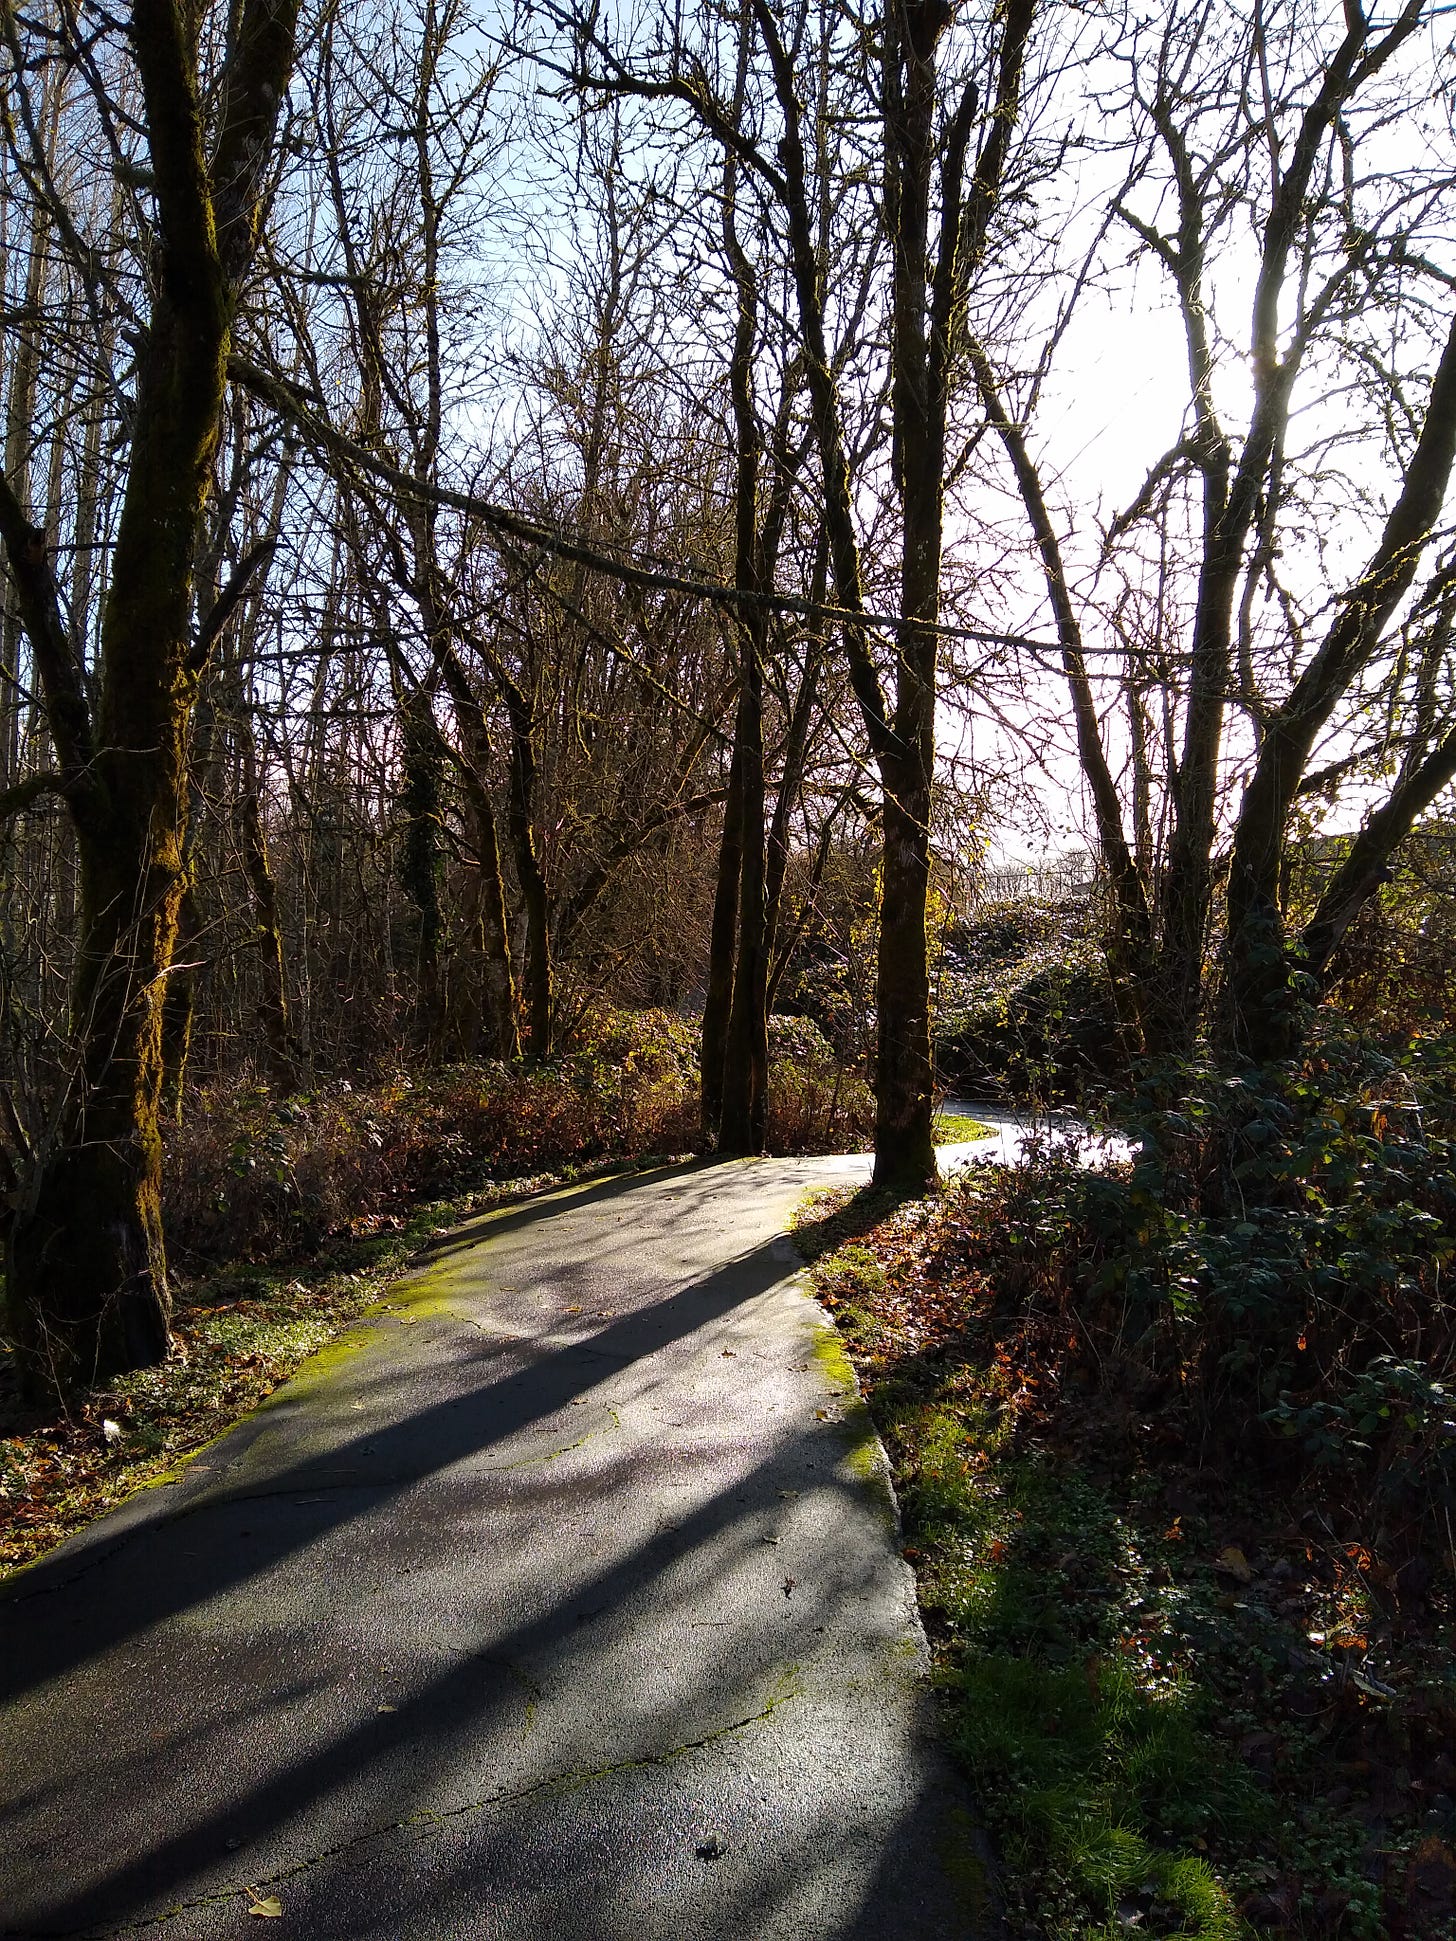 Another trail through bare trees, the sun casting shadows of tree trunks across it